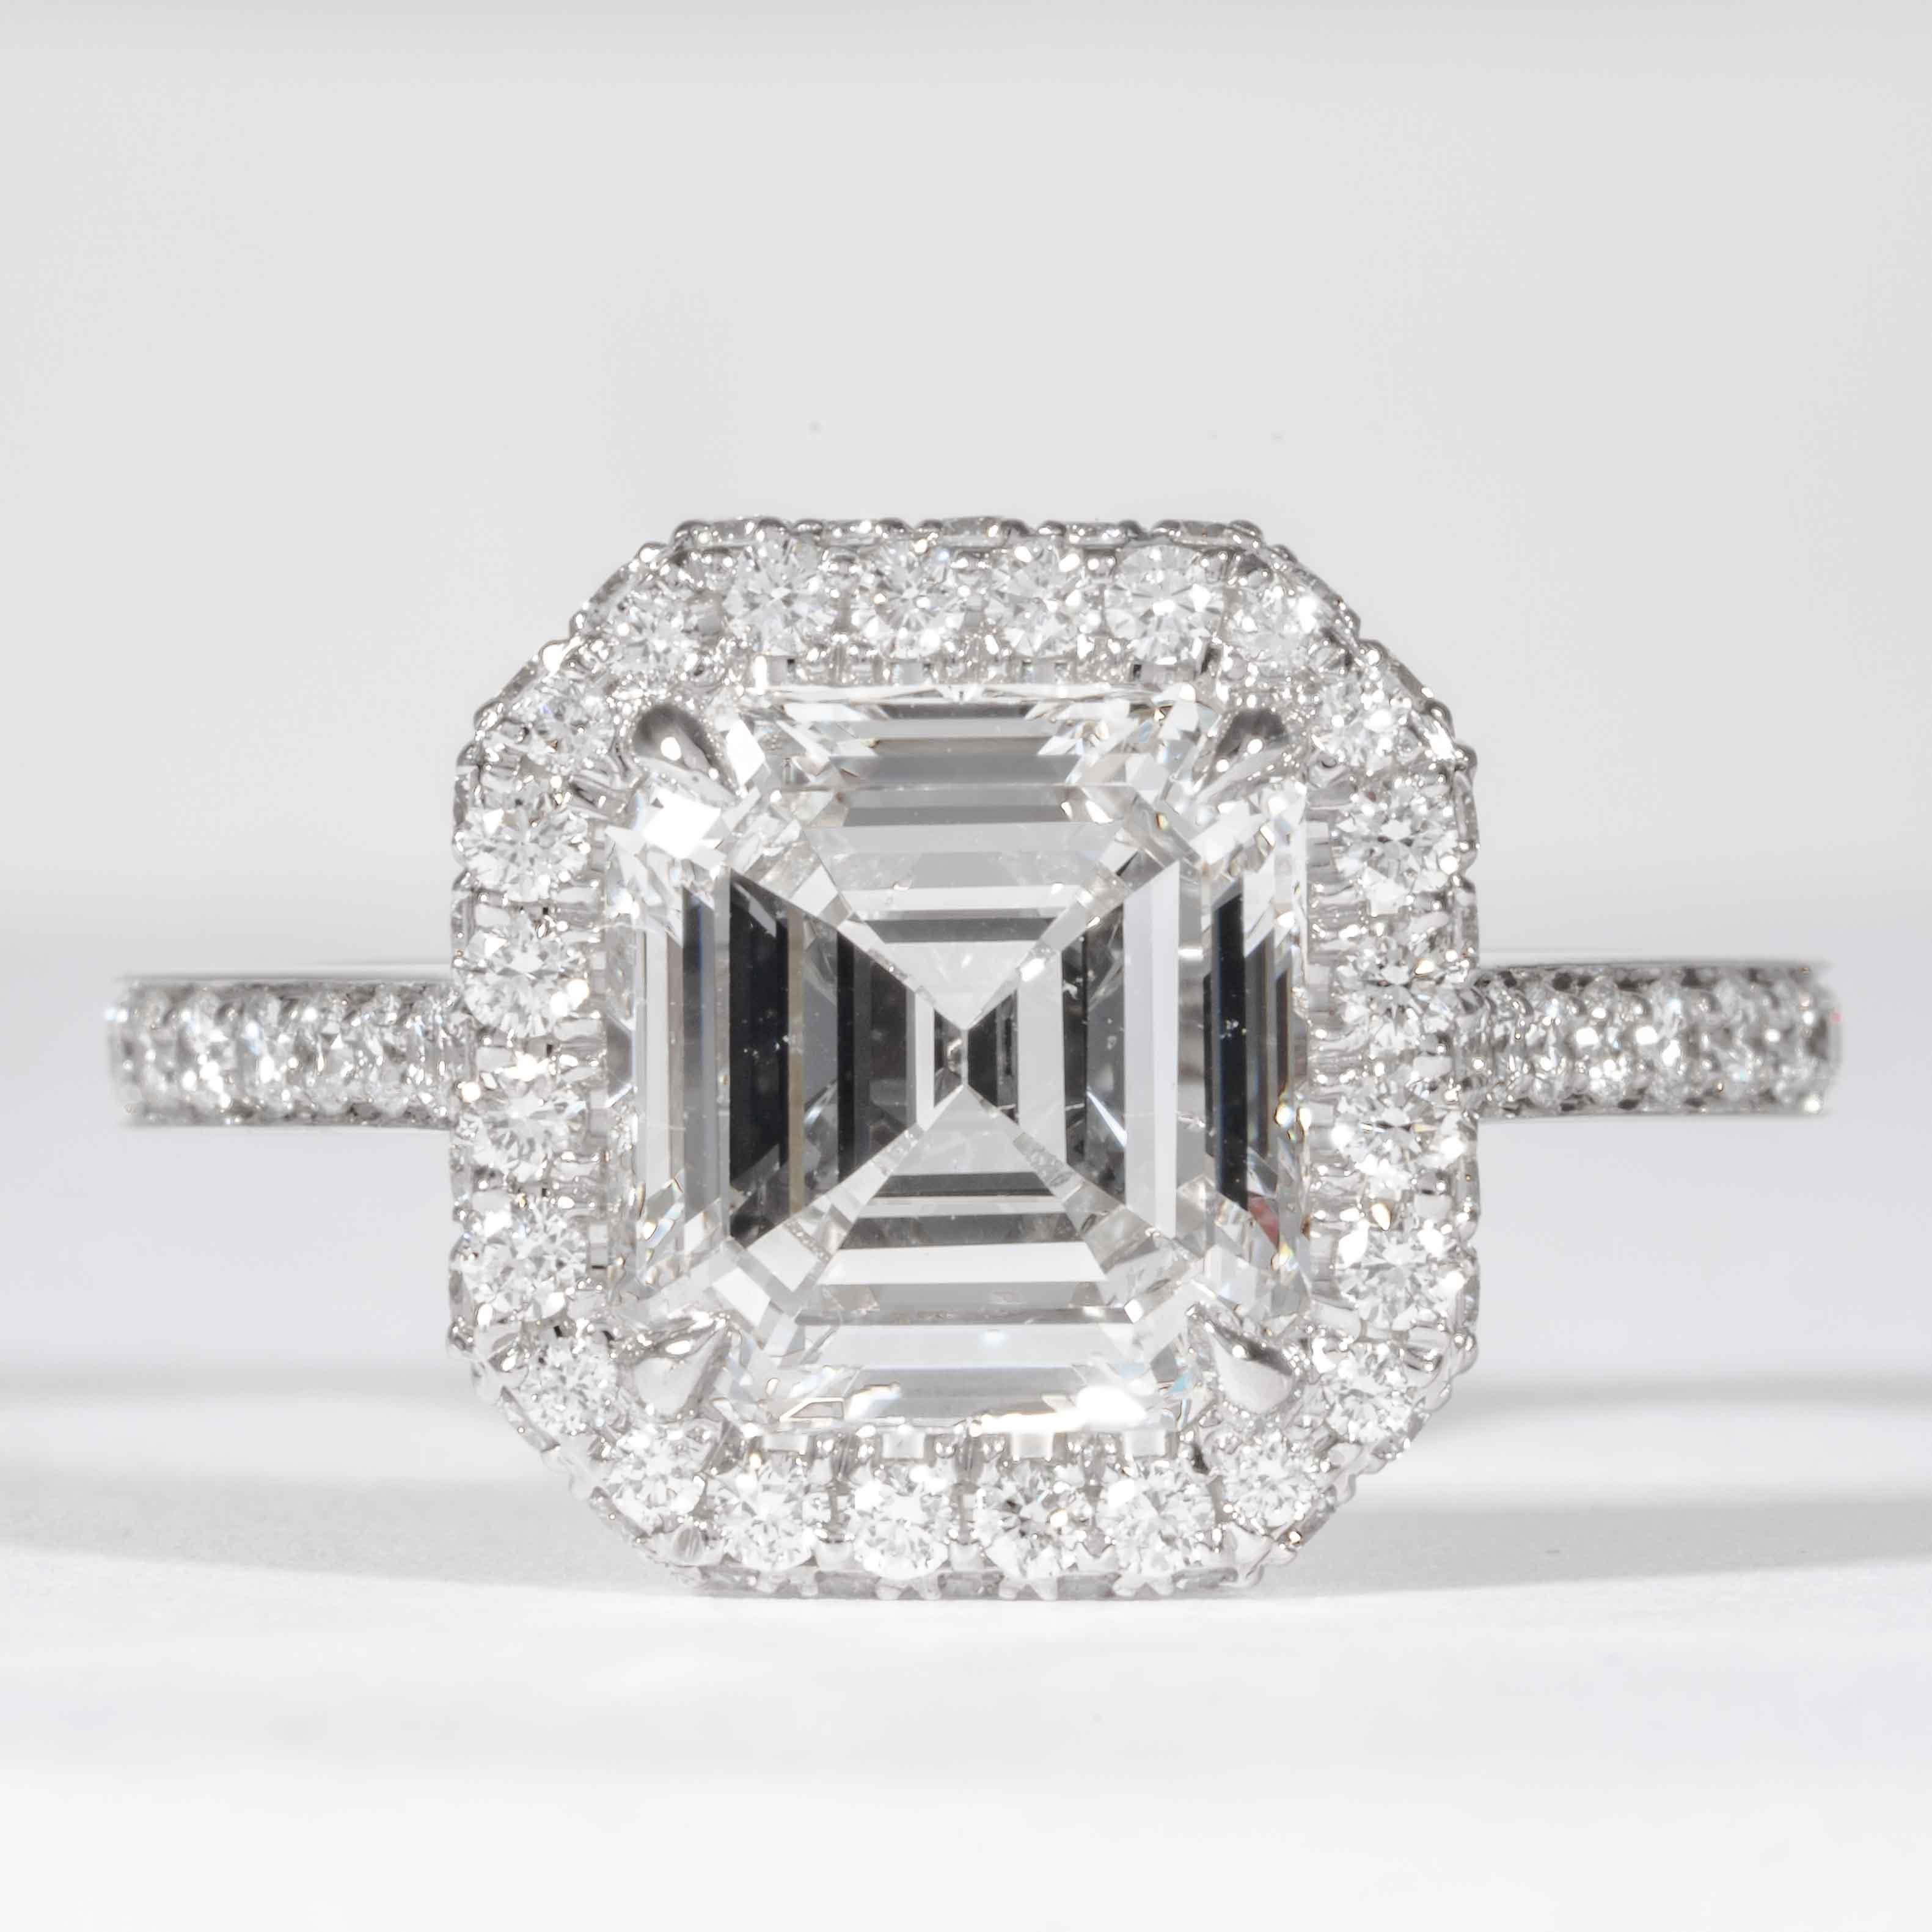 This diamond ring is offered by Shreve, Crump & Low. This 2.74 carat GIA certified E SI1 emerald cut diamond is custom set in a handcrafted Shreve, Crump & Low platinum diamond halo ring. The 2.74 carat Emerald cut is surrounded by 88 round diamonds